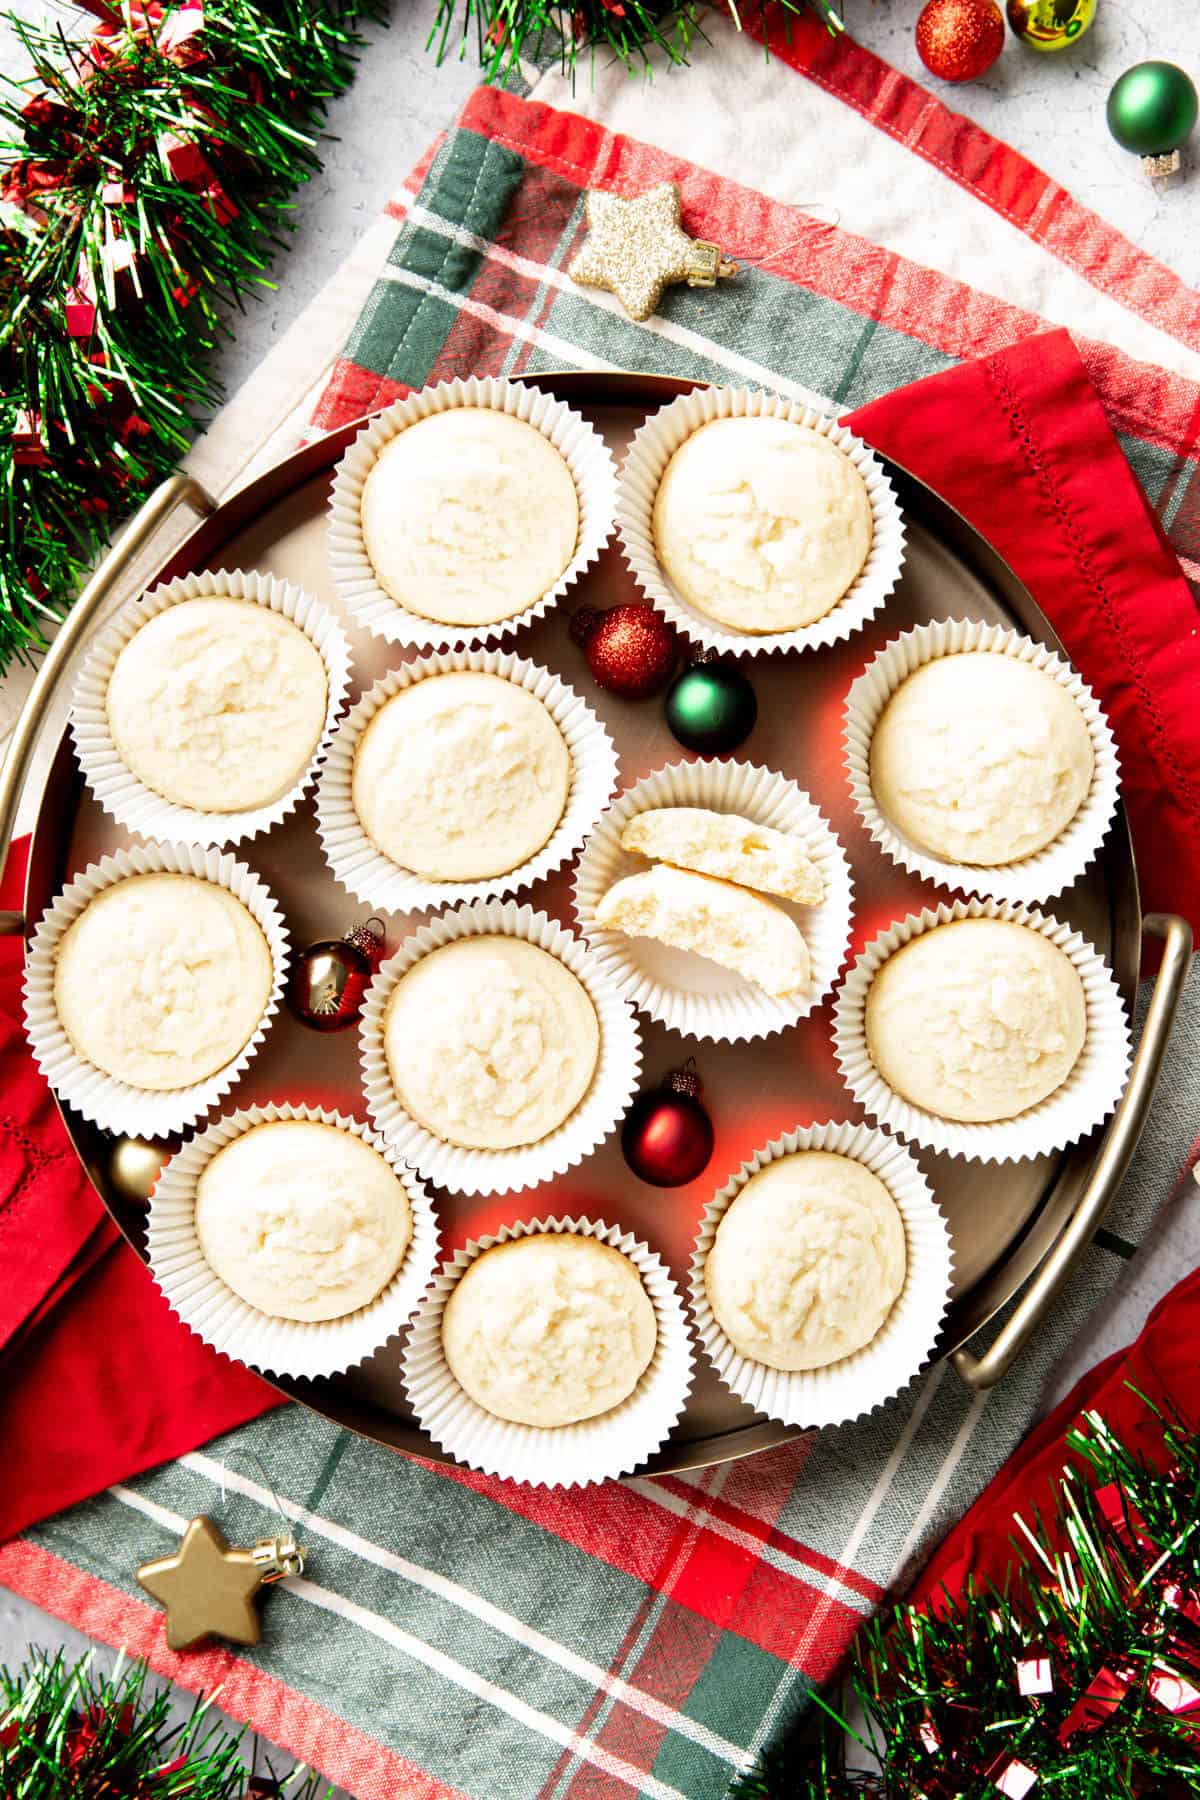 whipped shortbread cookies in a festive serving tray.